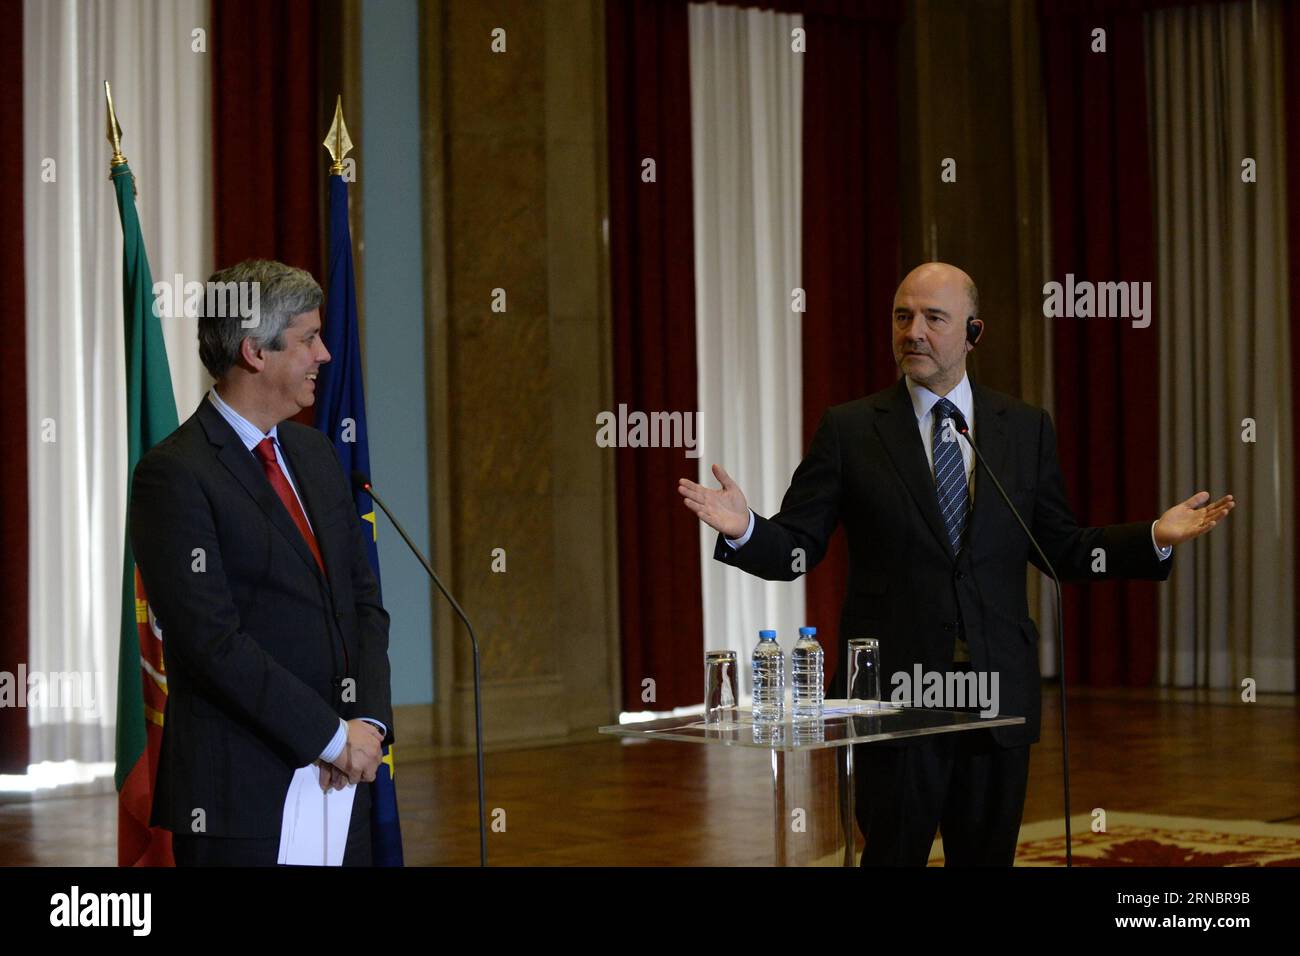 (160310) -- LISBON, March 10, 2016 -- Portugal s Finance Minister Mario Centeno (L) and European Commissioner for Economic and Financial Affairs Pierre Moscovici attend a press conference in Lisbon, Portugal, March 10, 2016. European Commissioner for Economic and Financial Affairs Pierre Moscovici said here on Thursday that he will be working closely with the Portuguese government to put the country back on track. ) PORTUGAL-LISBON-EU-FINANCE ZhangxLiyun PUBLICATIONxNOTxINxCHN   160310 Lisbon March 10 2016 Portugal S Finance Ministers Mario Centeno l and European Commissioner for Economic and Stock Photo